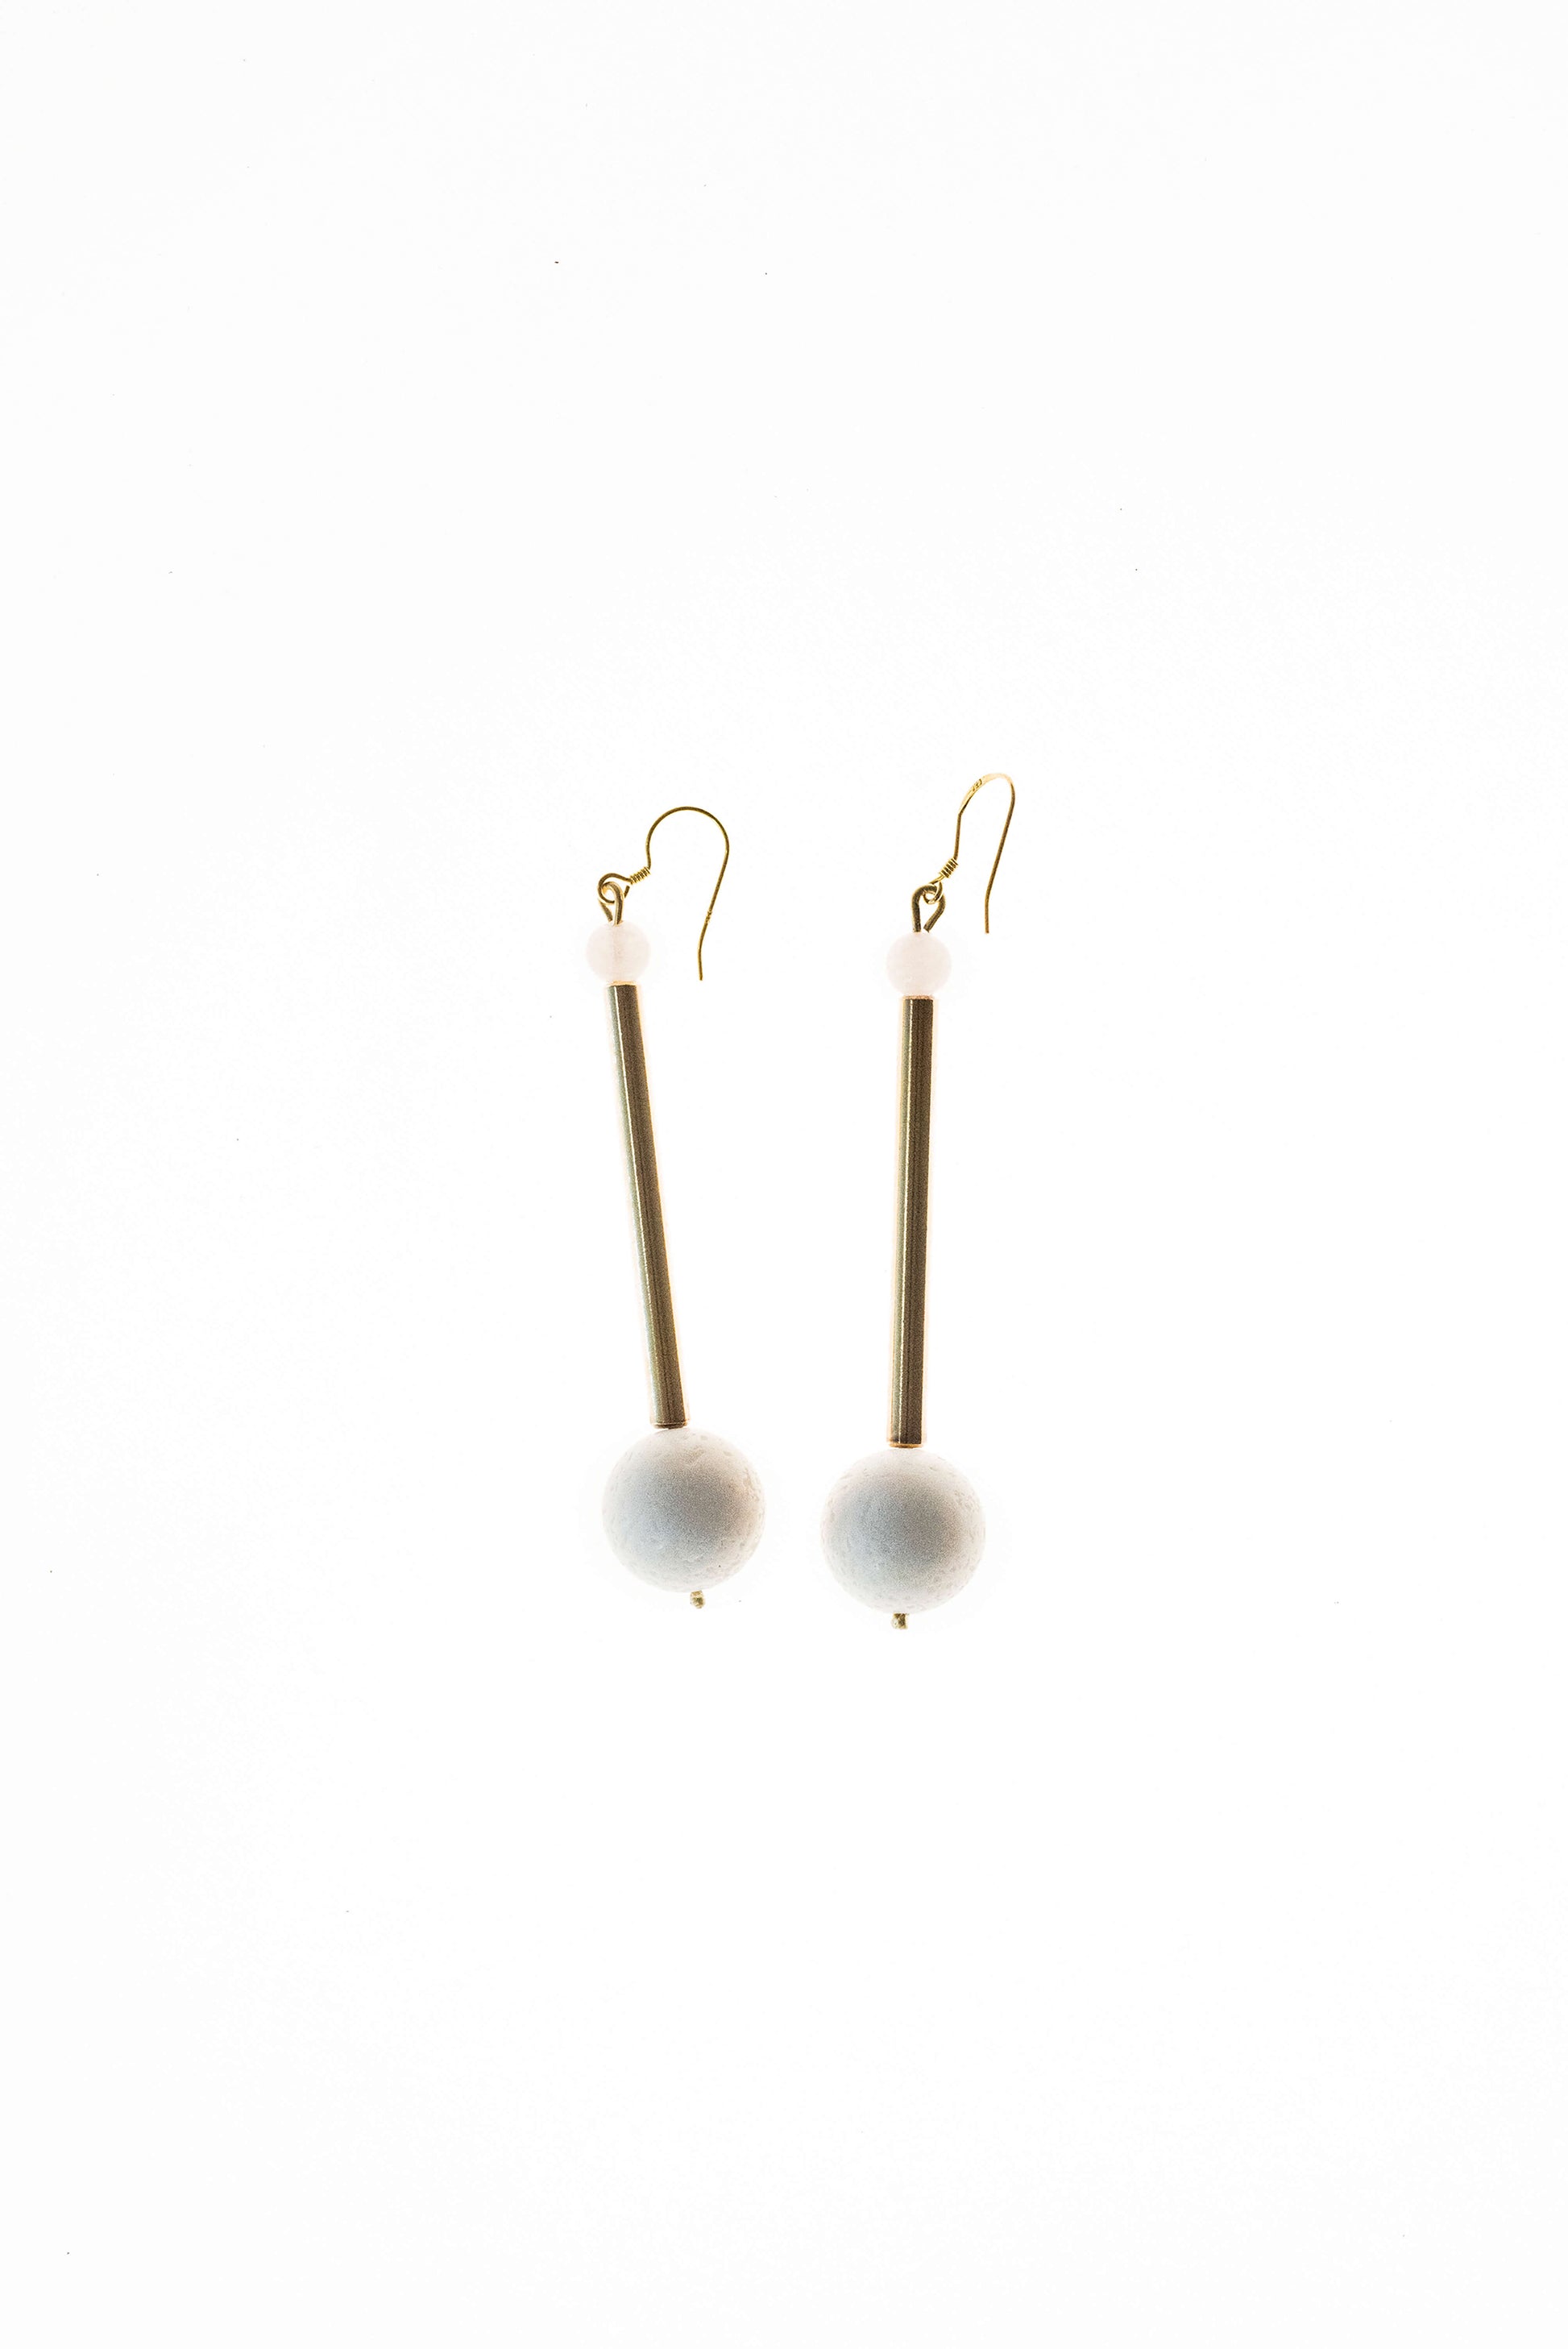 Earrings made of hand-cut, hand-polished and 24K gold-plated brass, white coral, rose quartz and gold plated sterling silver.